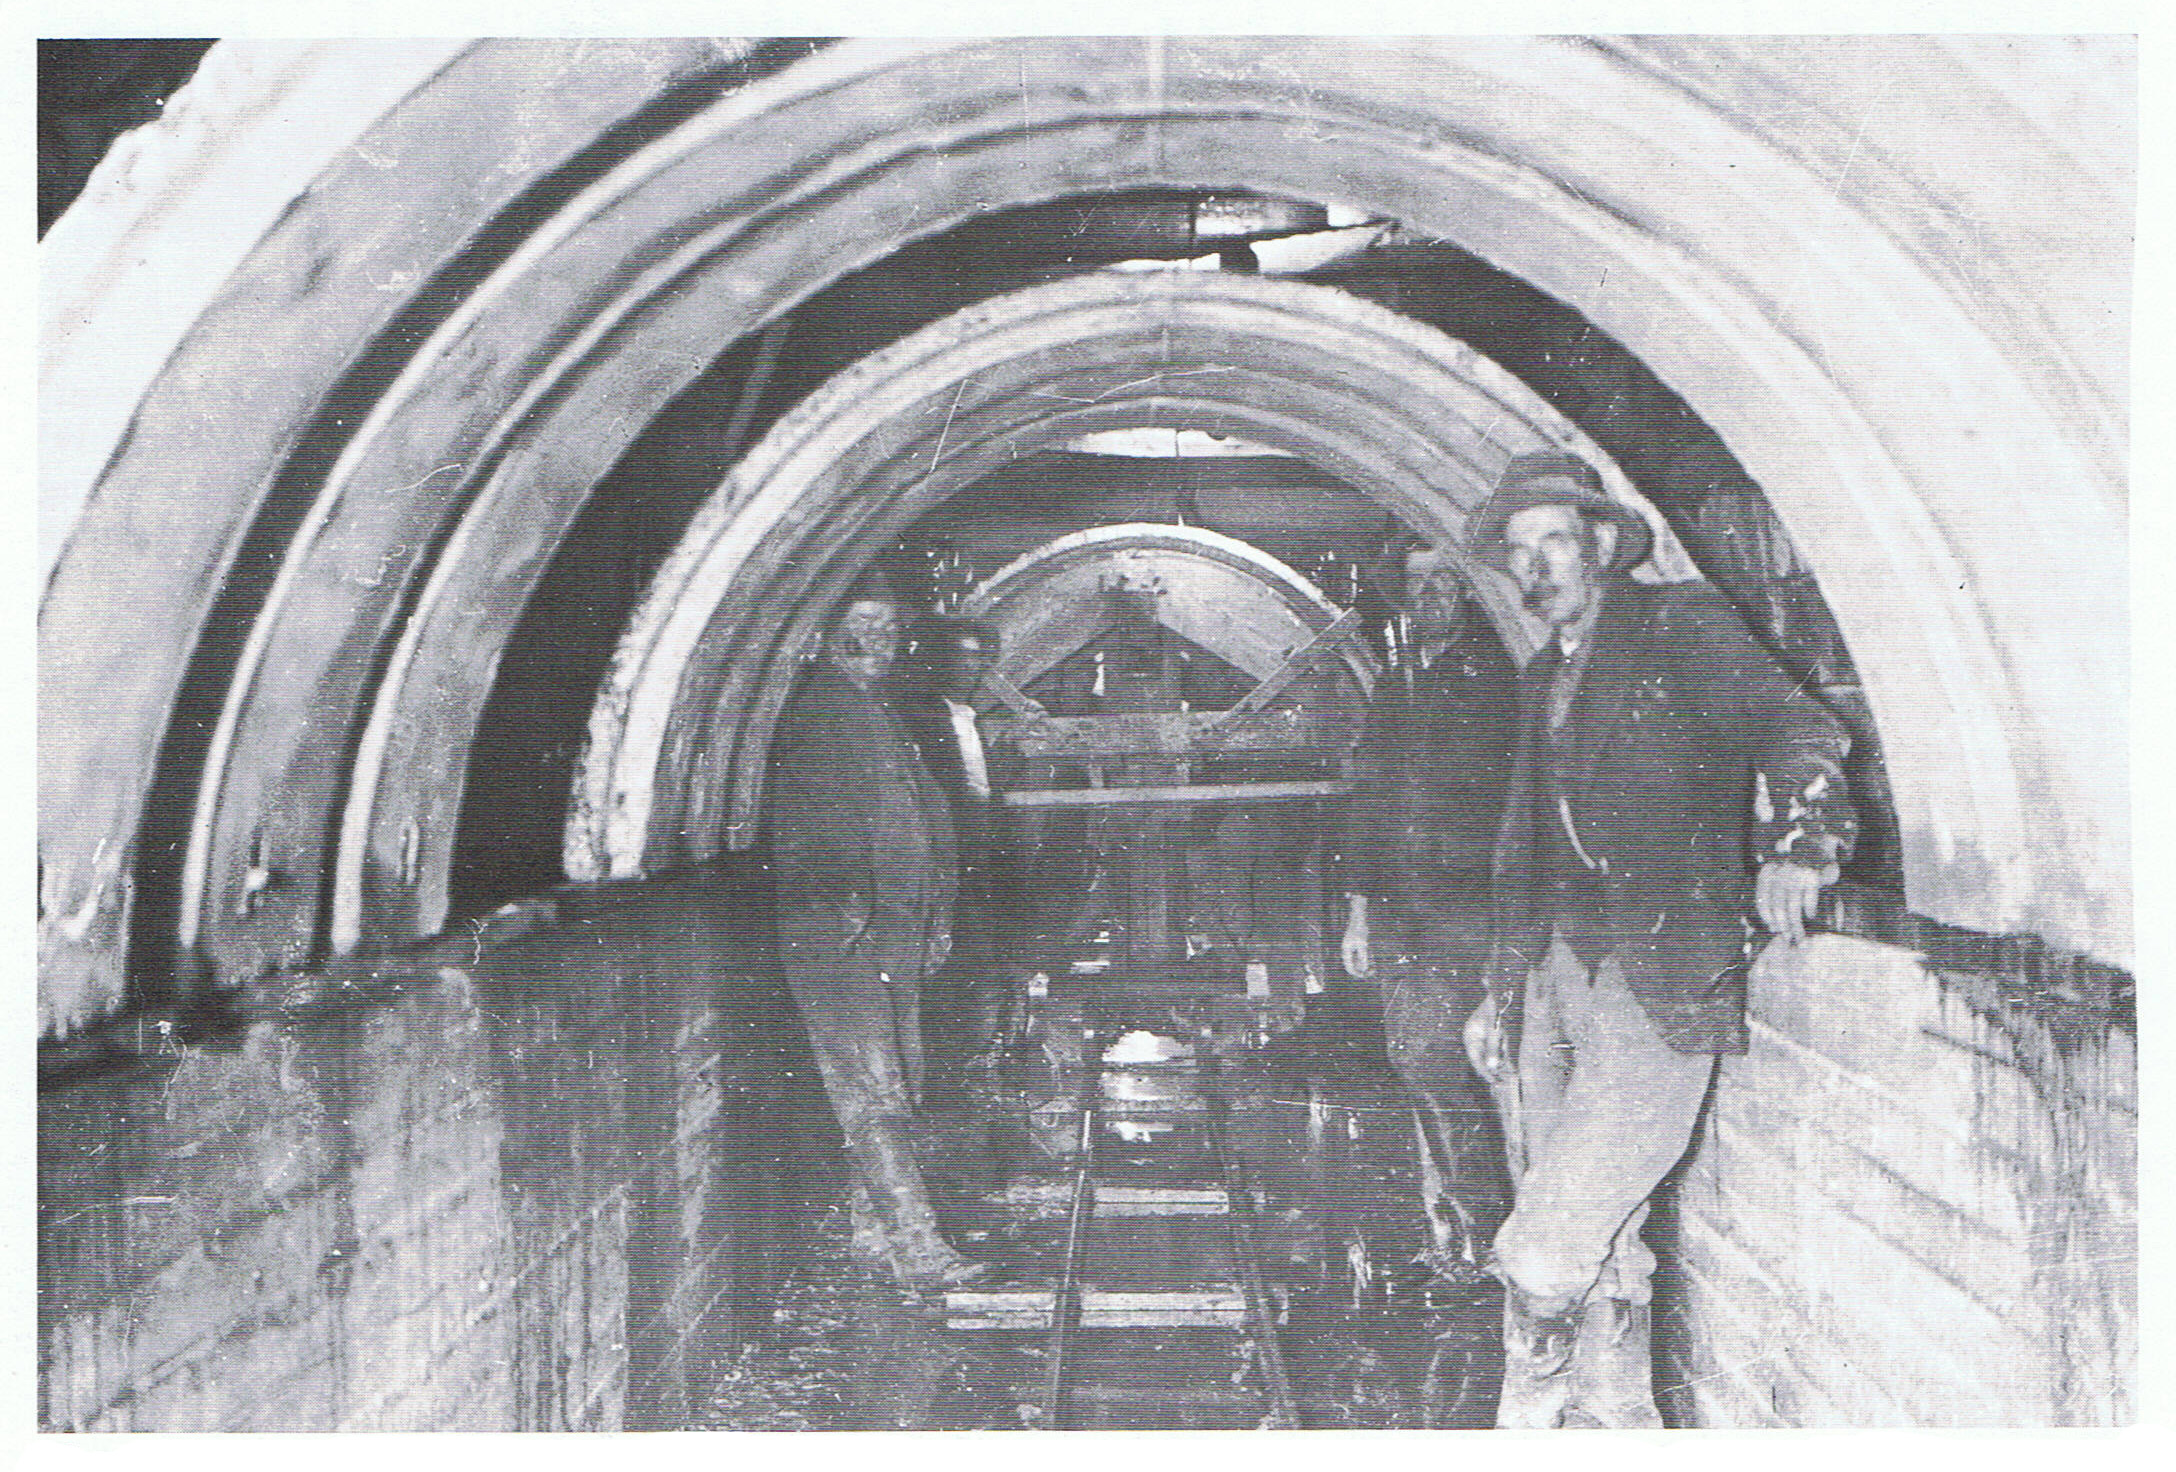 Internal view of sewer tunnel